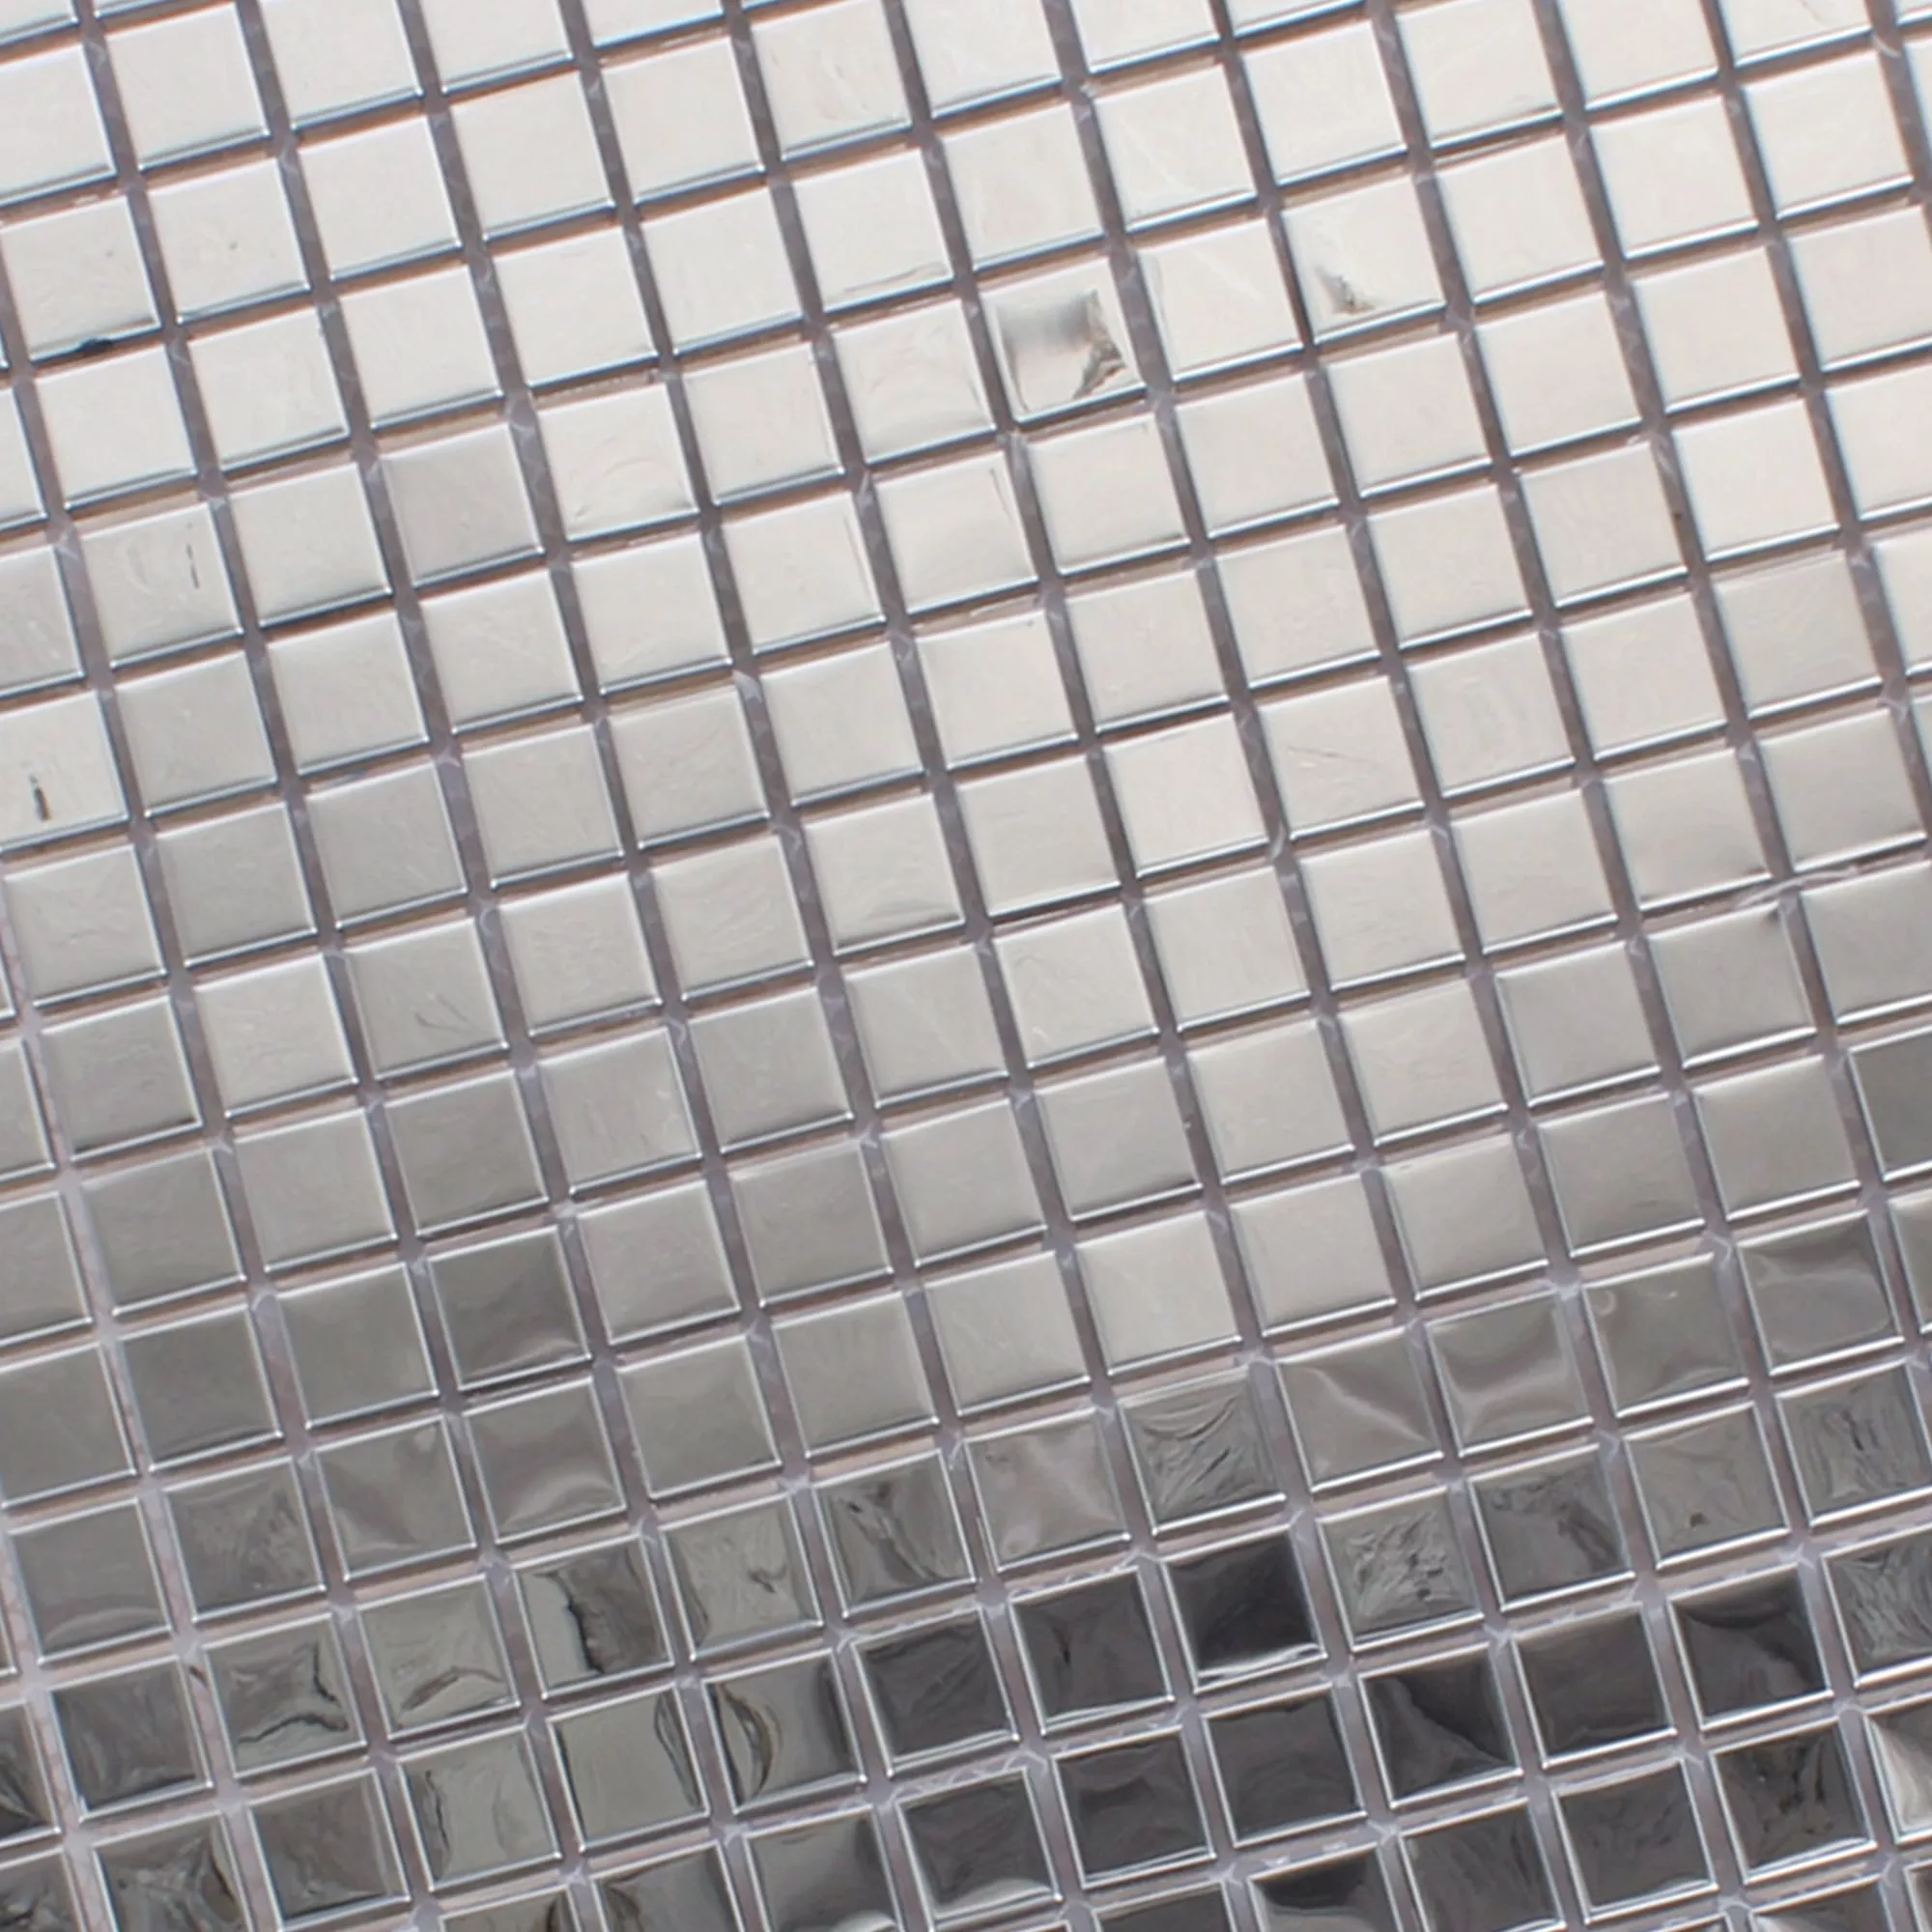 Stainless Steel Mosaic Tiles Glossy Square 15